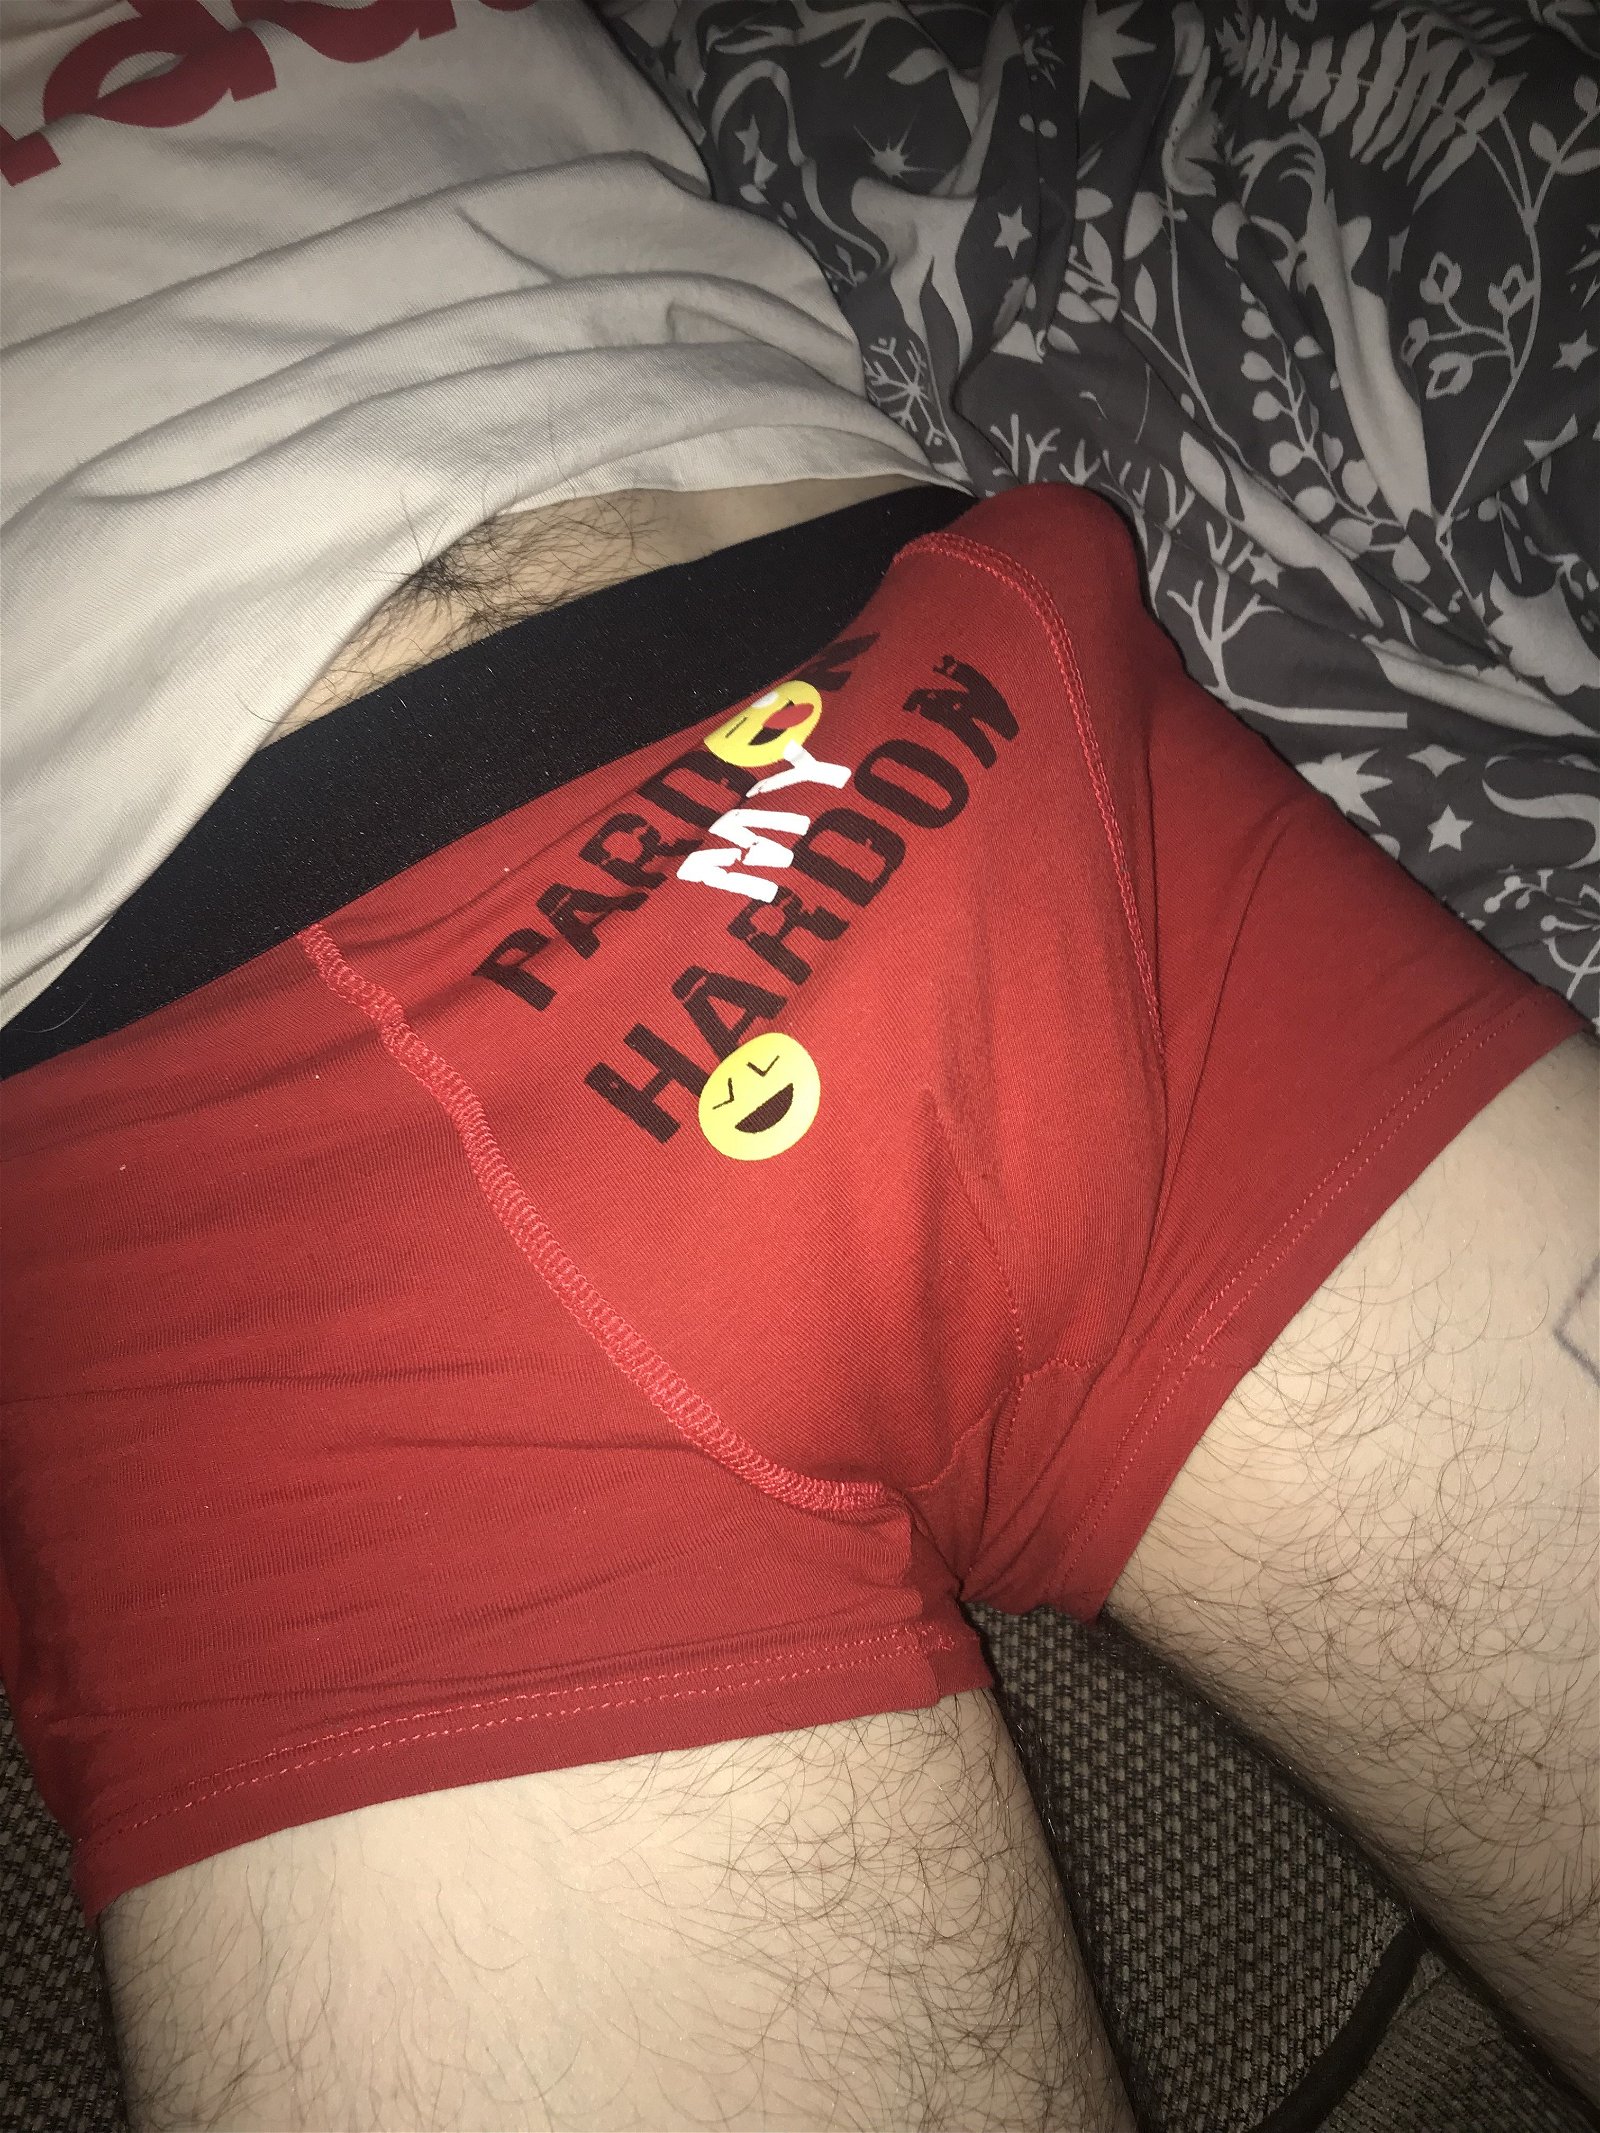 Photo by Dirtyscot8 with the username @Dirtyscot8,  June 27, 2022 at 8:38 AM. The post is about the topic Rate My Amateur Dick